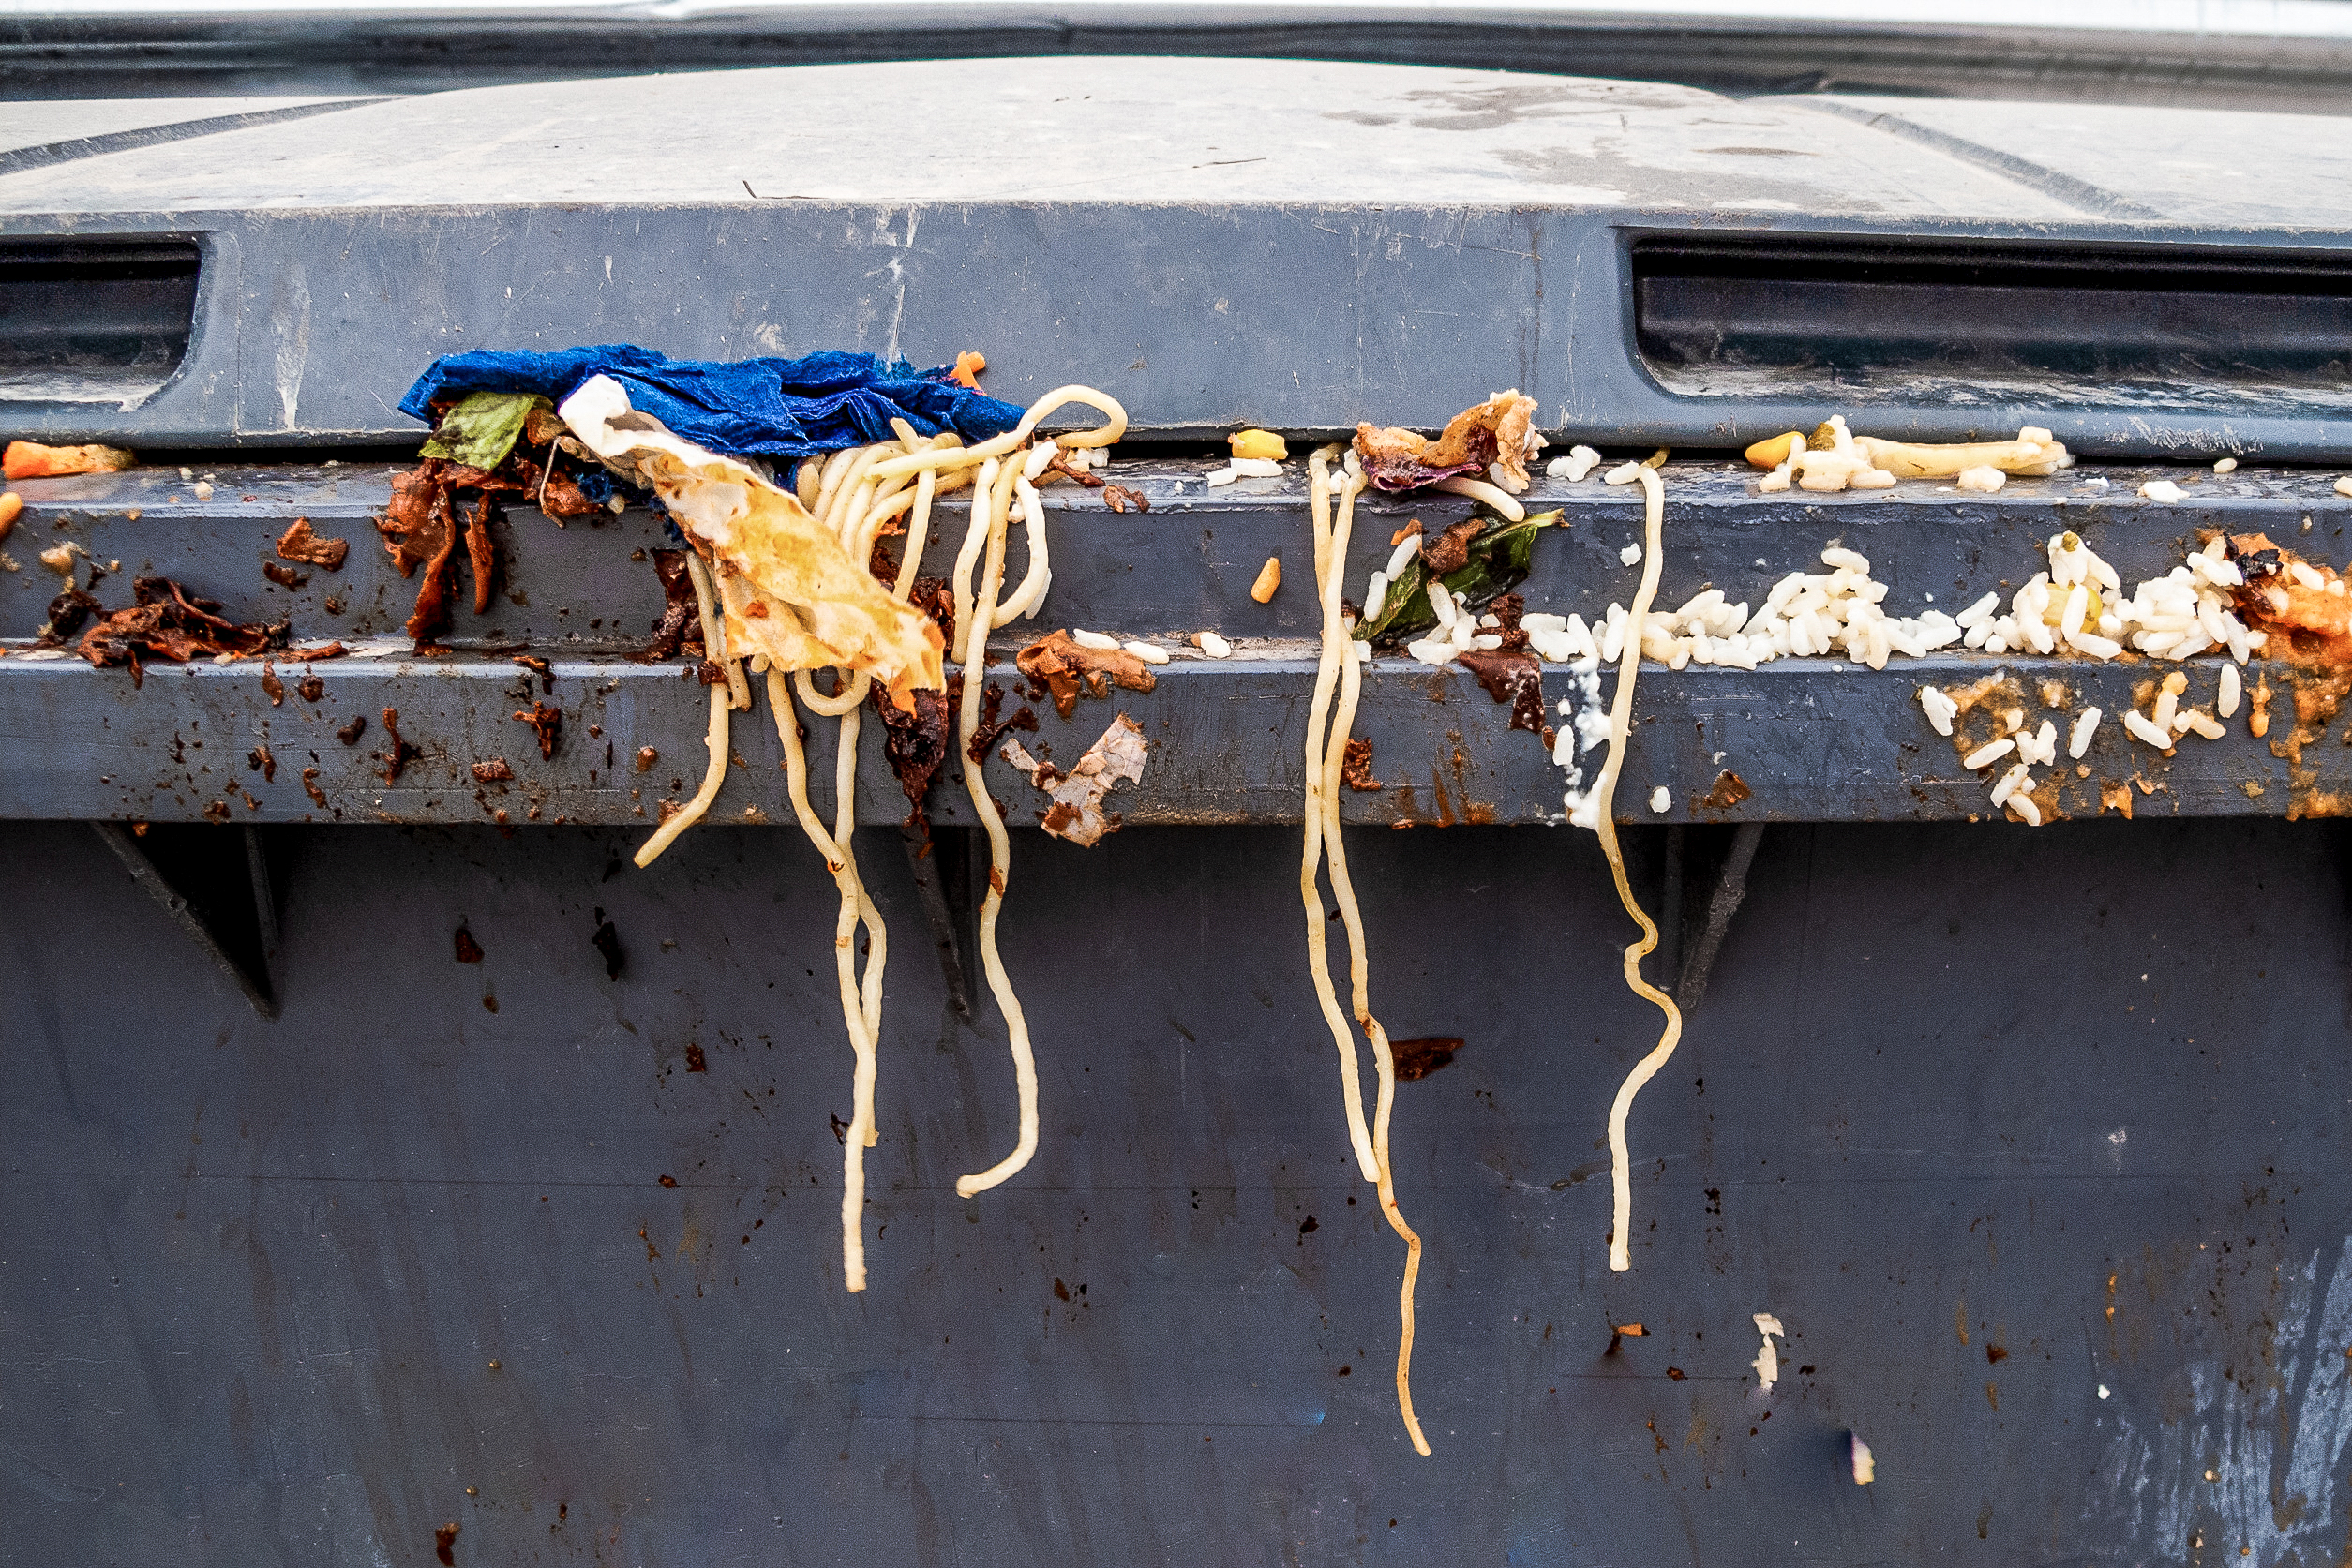 Food Waste: Spaghetti pasta and other waste food on a gray trash bin.